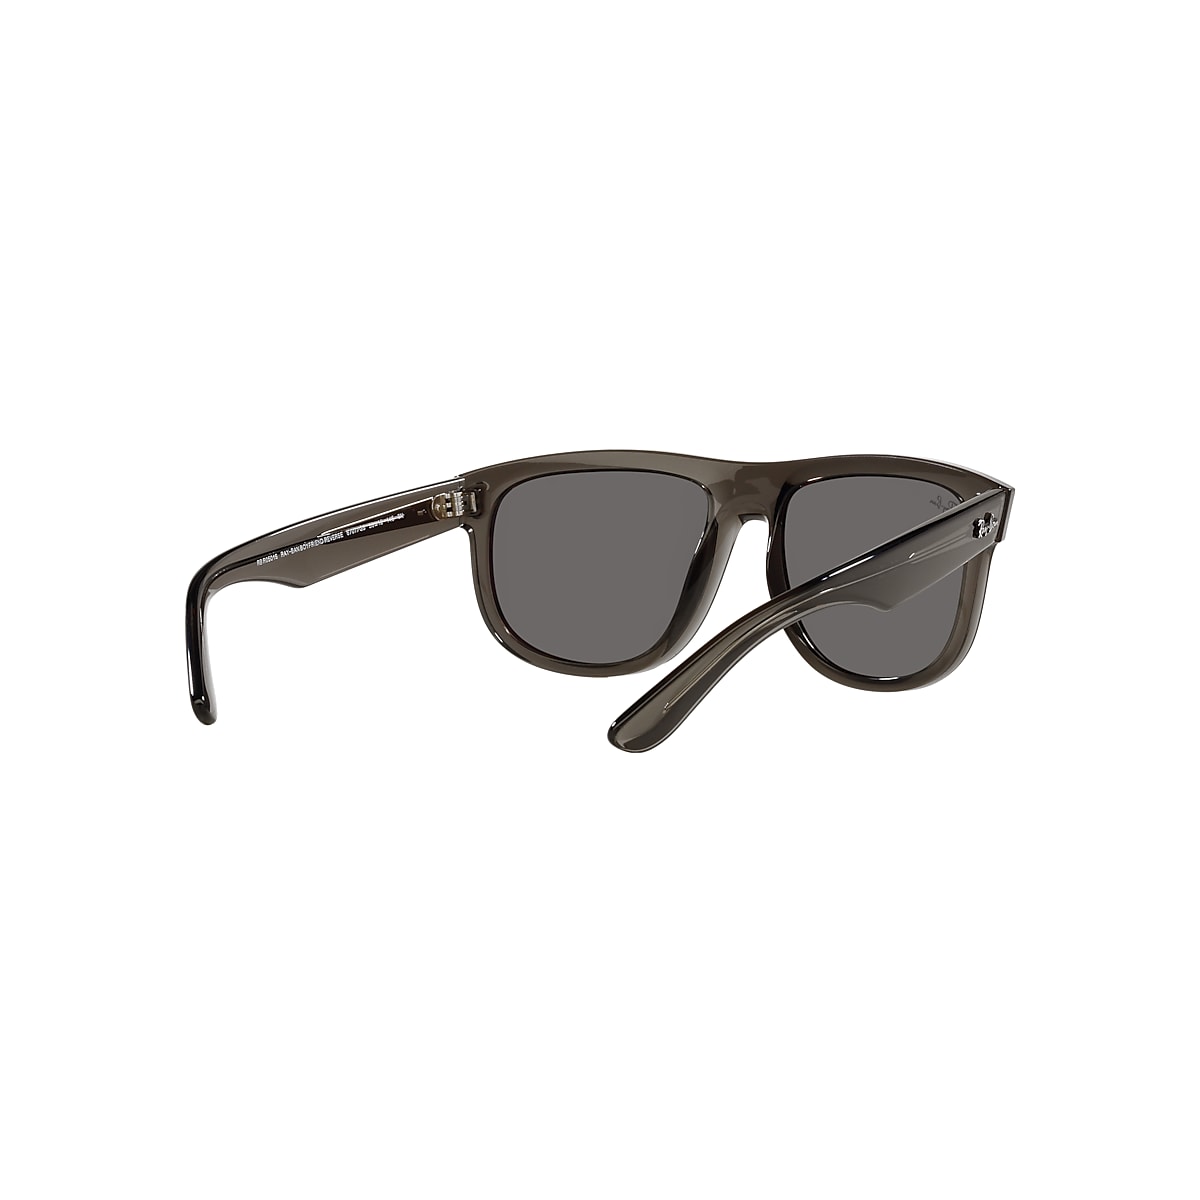 Grey | Transparent Sunglasses RBR0501S - US REVERSE BOYFRIEND in Silver Dark and Ray-Ban®